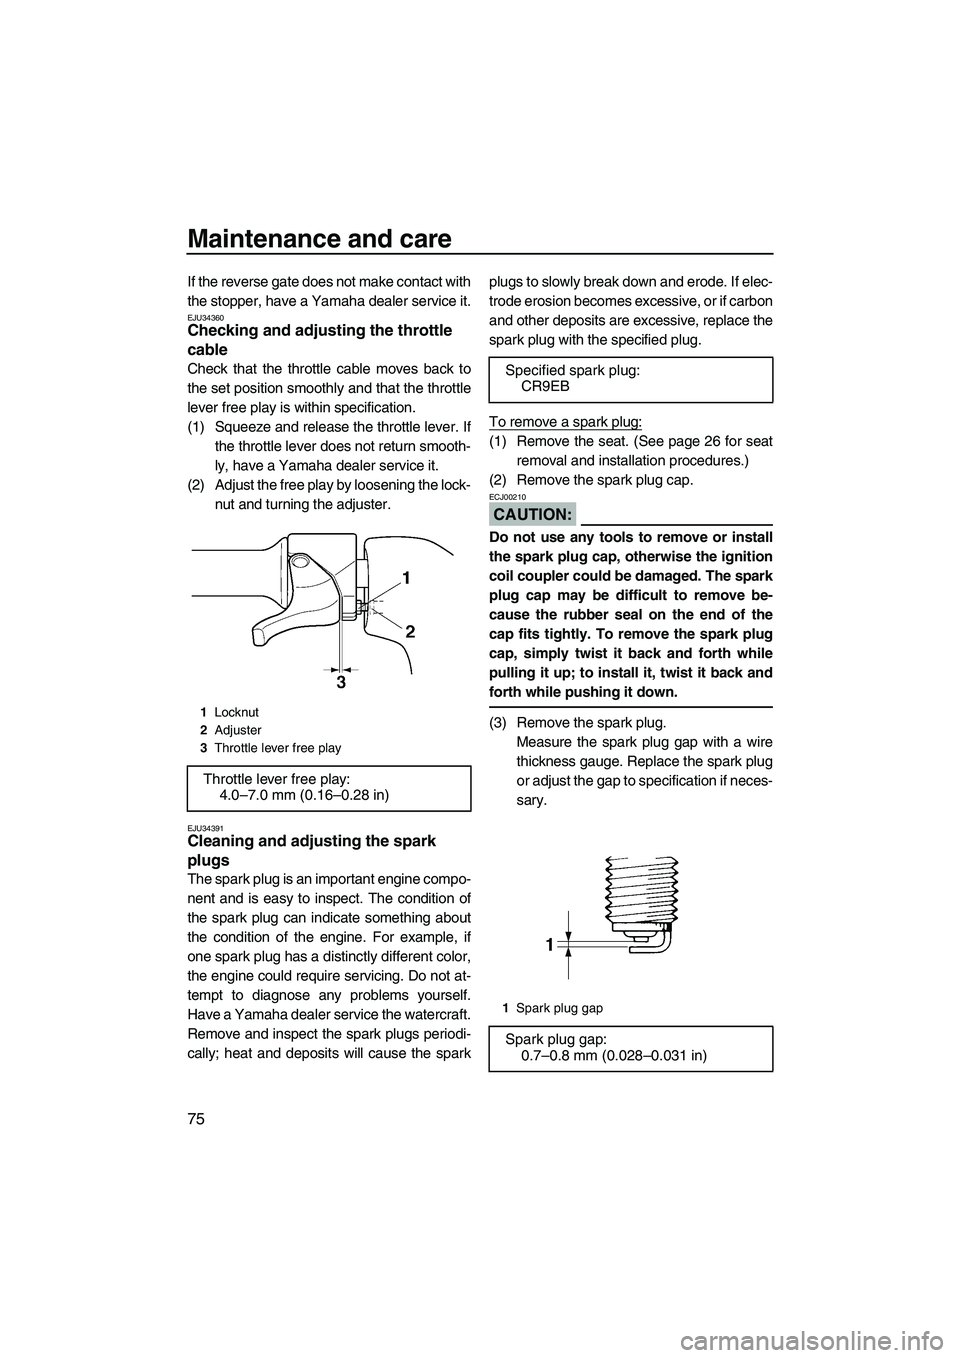 YAMAHA VX SPORT 2007  Owners Manual Maintenance and care
75
If the reverse gate does not make contact with
the stopper, have a Yamaha dealer service it.
EJU34360Checking and adjusting the throttle 
cable 
Check that the throttle cable m